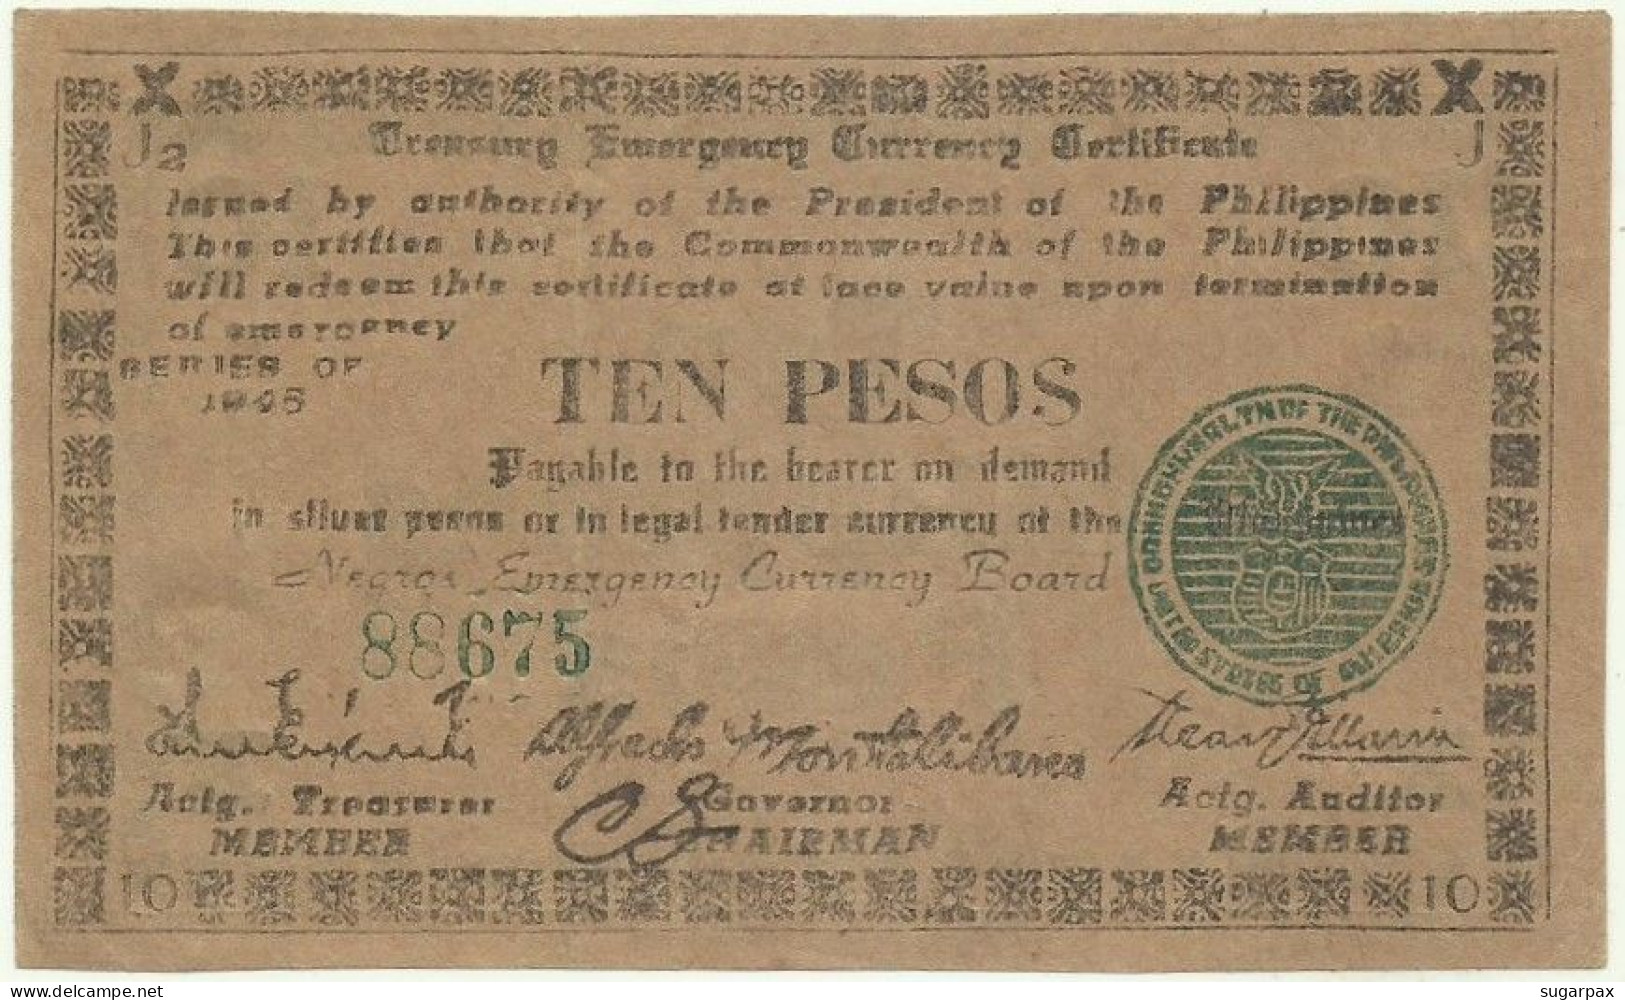 PHILIPPINES - 10 Pesos - 1945 - Pick S 683 - Serie J2 - Negros Emergency Currency Board - Filipinas